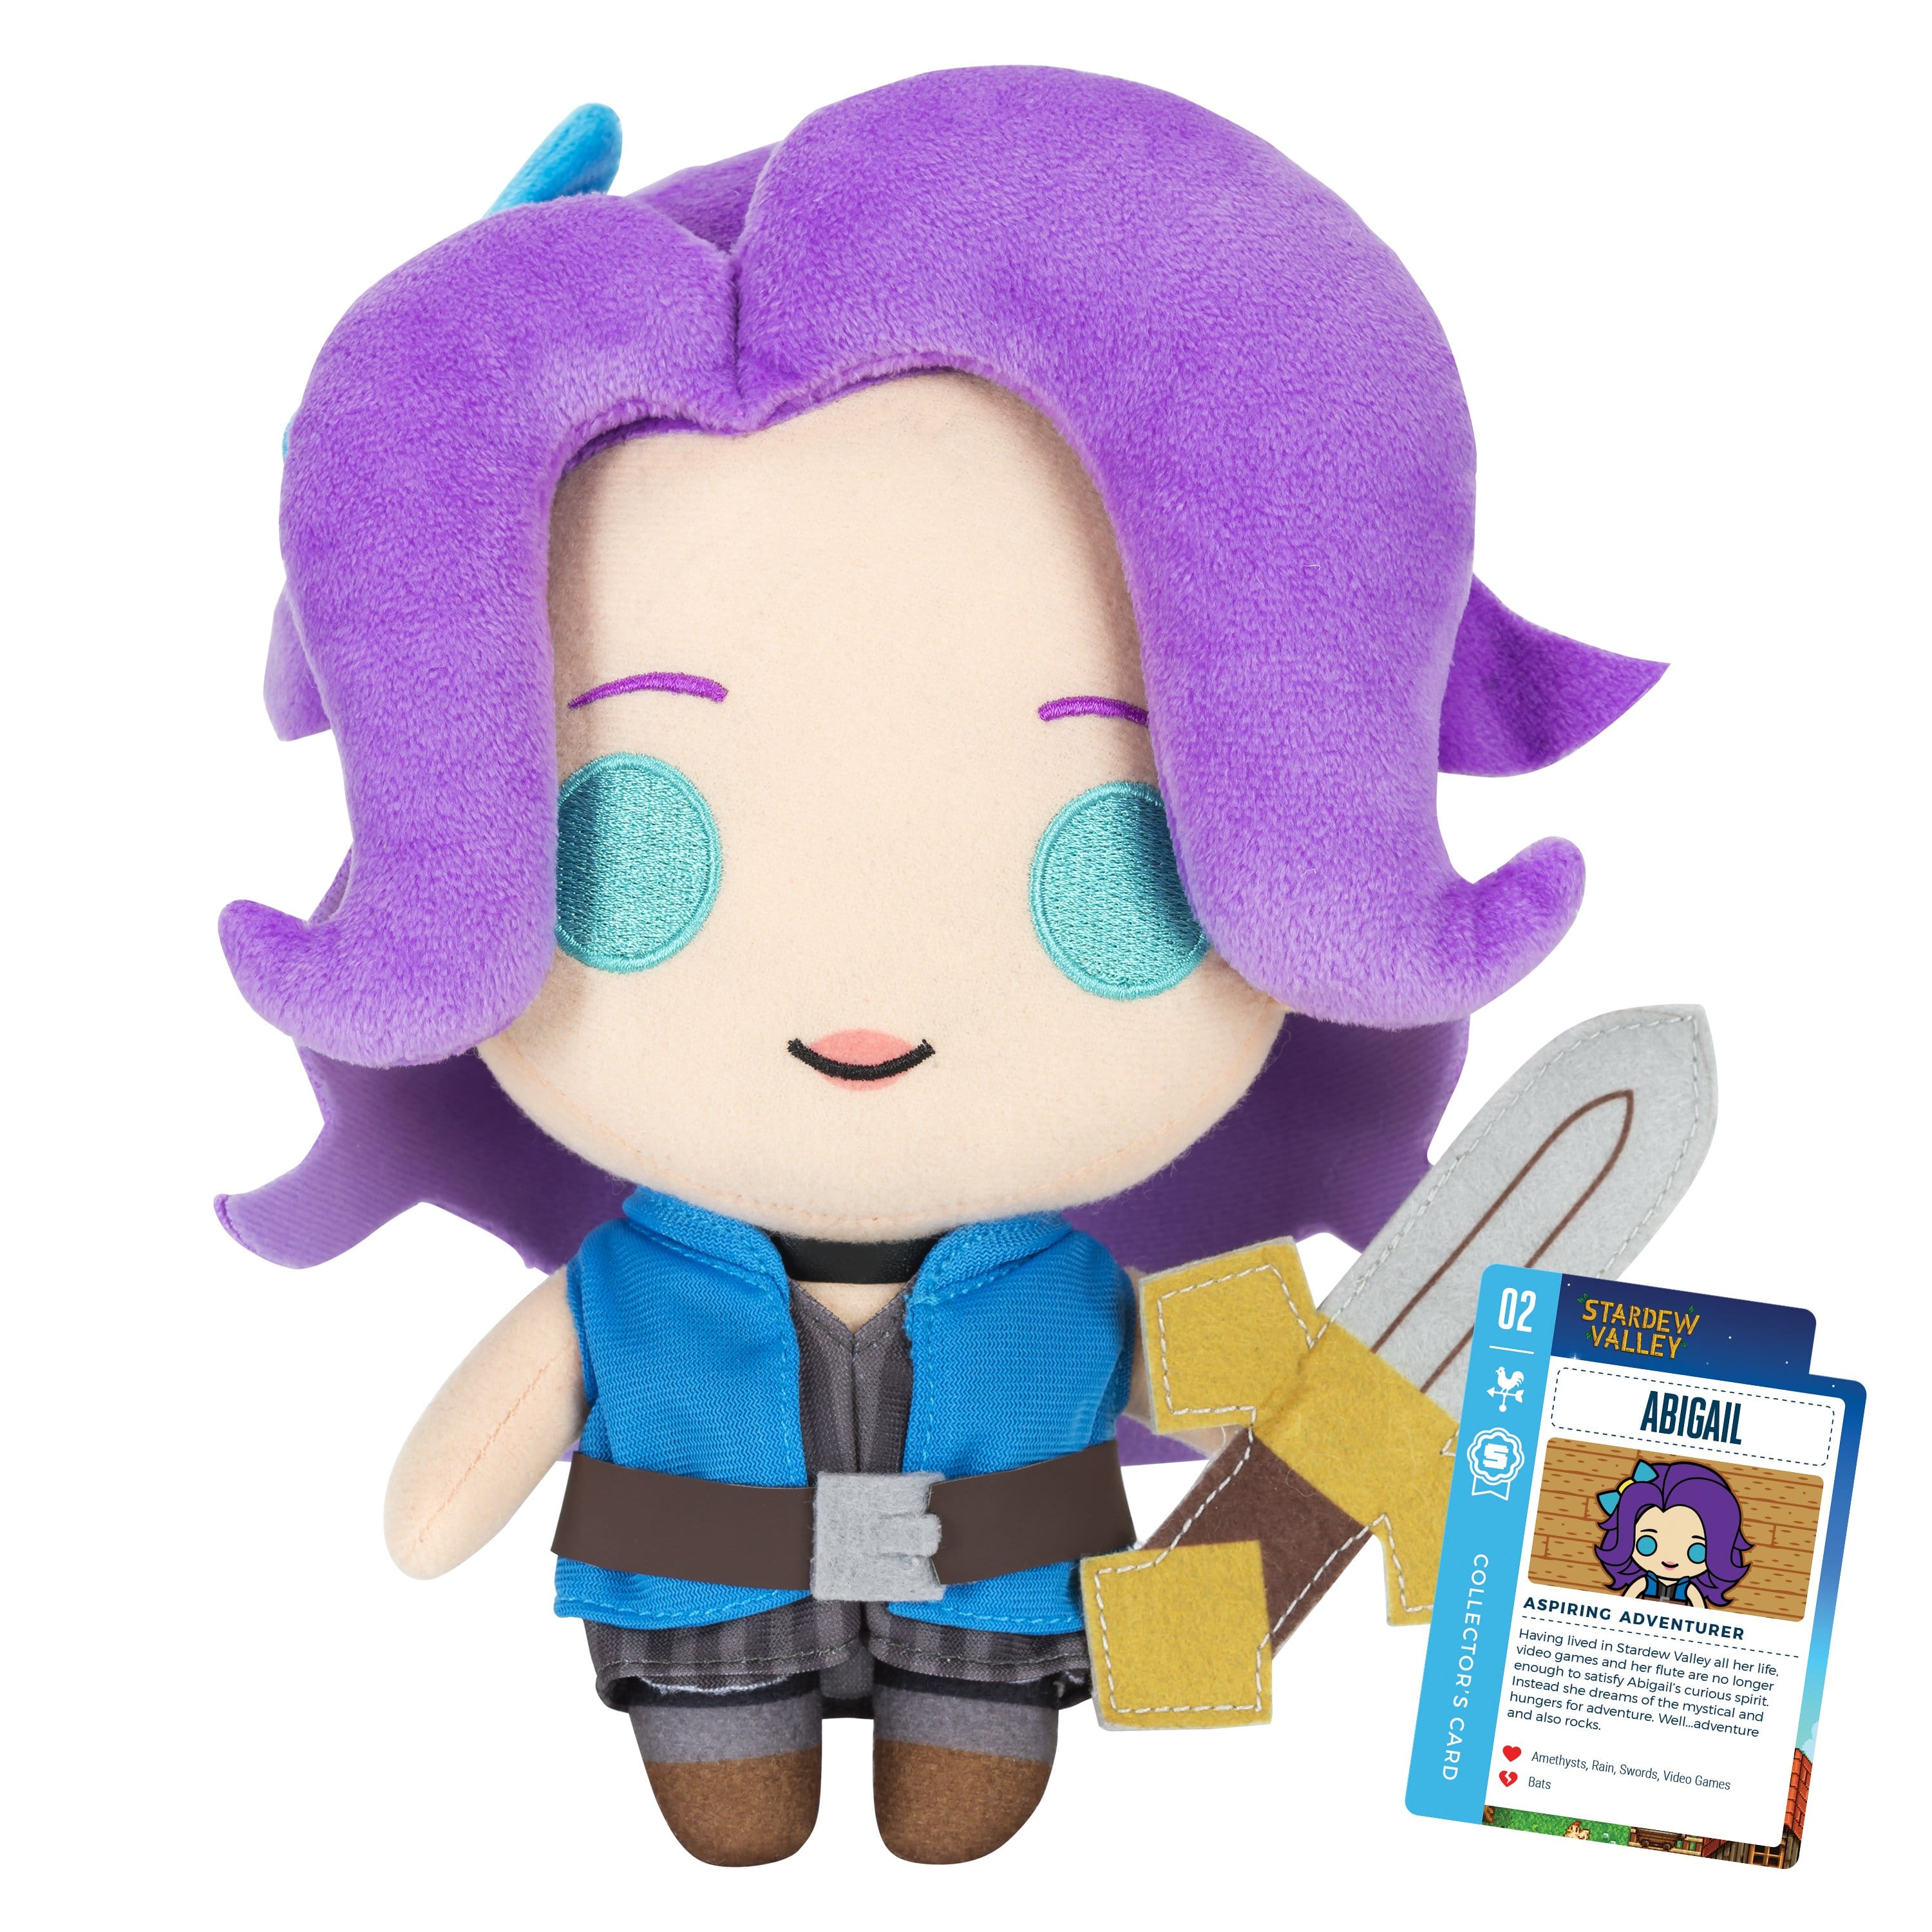 Stardew Valley - 10" Abigail Collector's Stuffed Plush Front View With Collector's Card